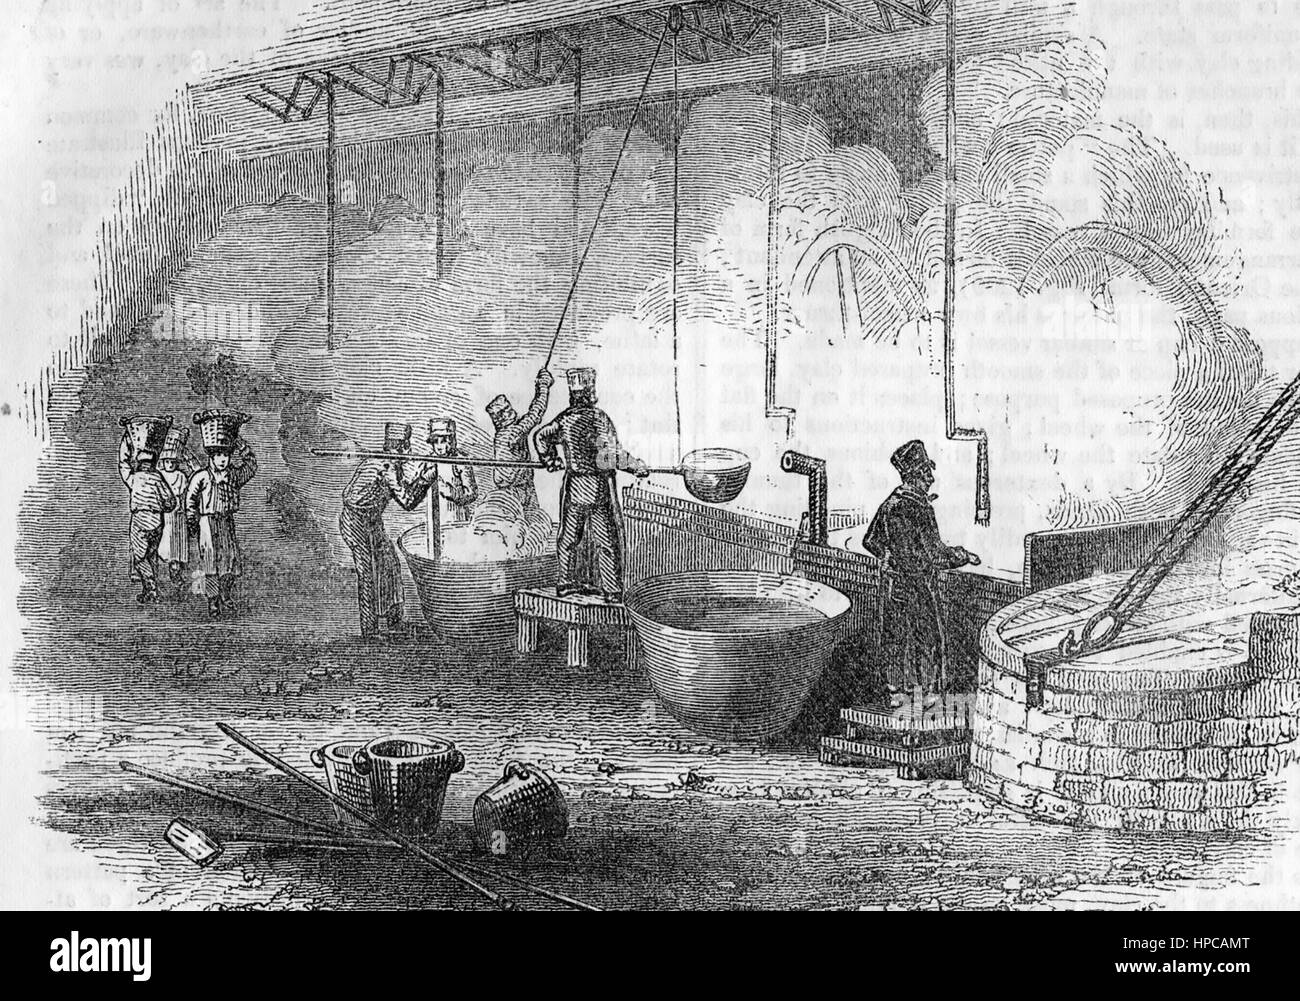 SOAP MANUFACTURE about 1857 Stock Photo